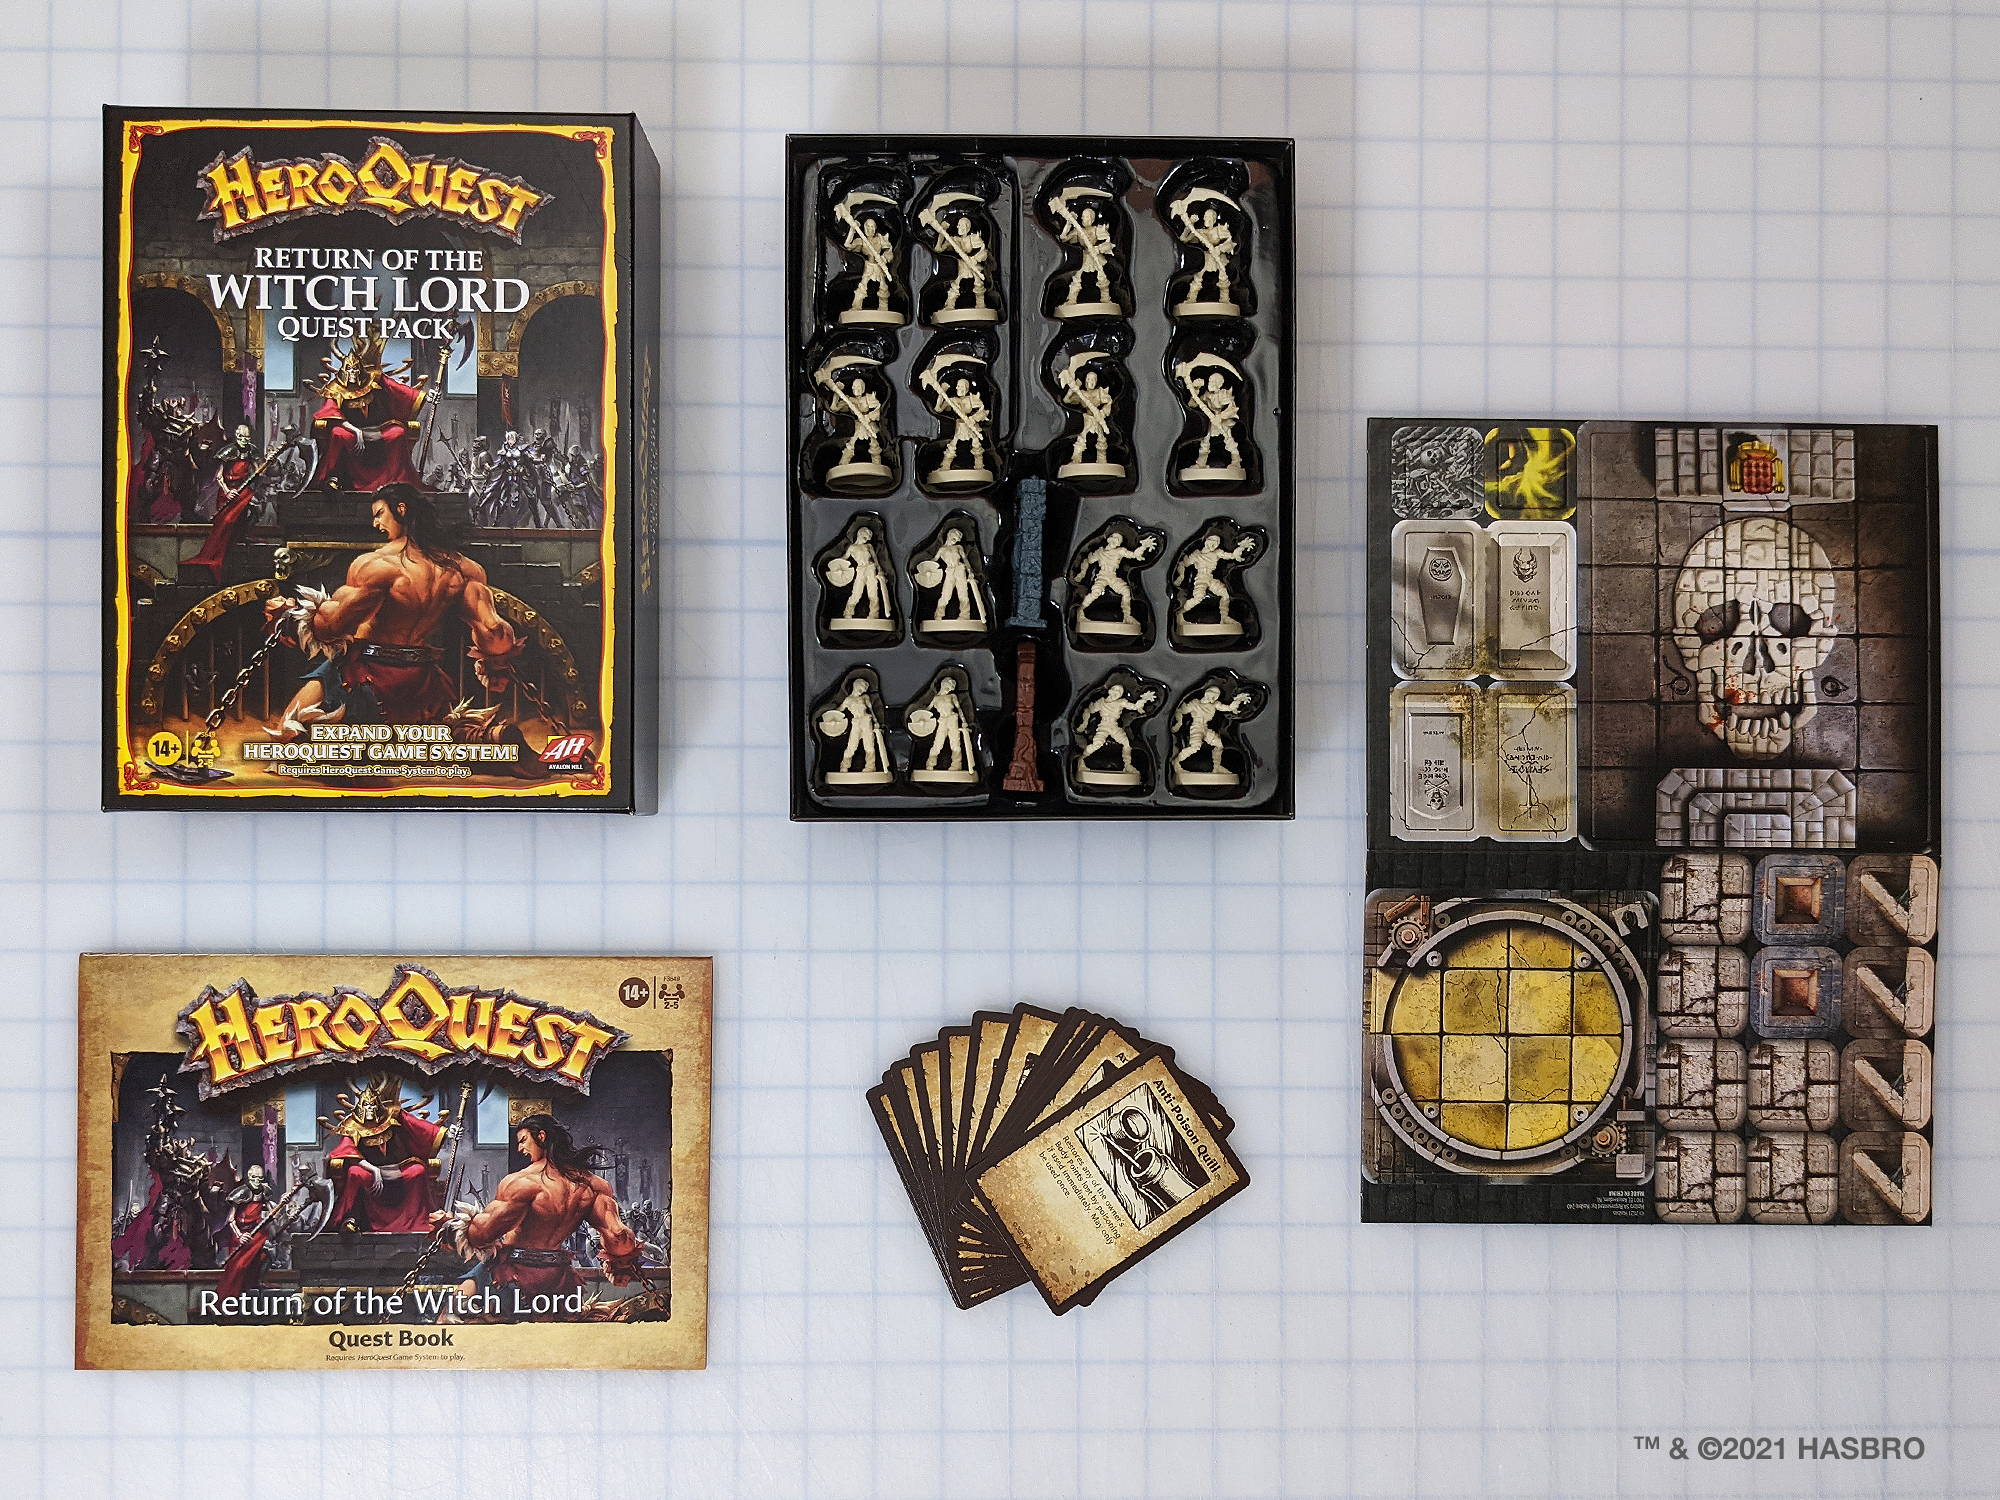 HeroQuest Mythic Quests (Mostly) Coming to Retail - Preorder Yours